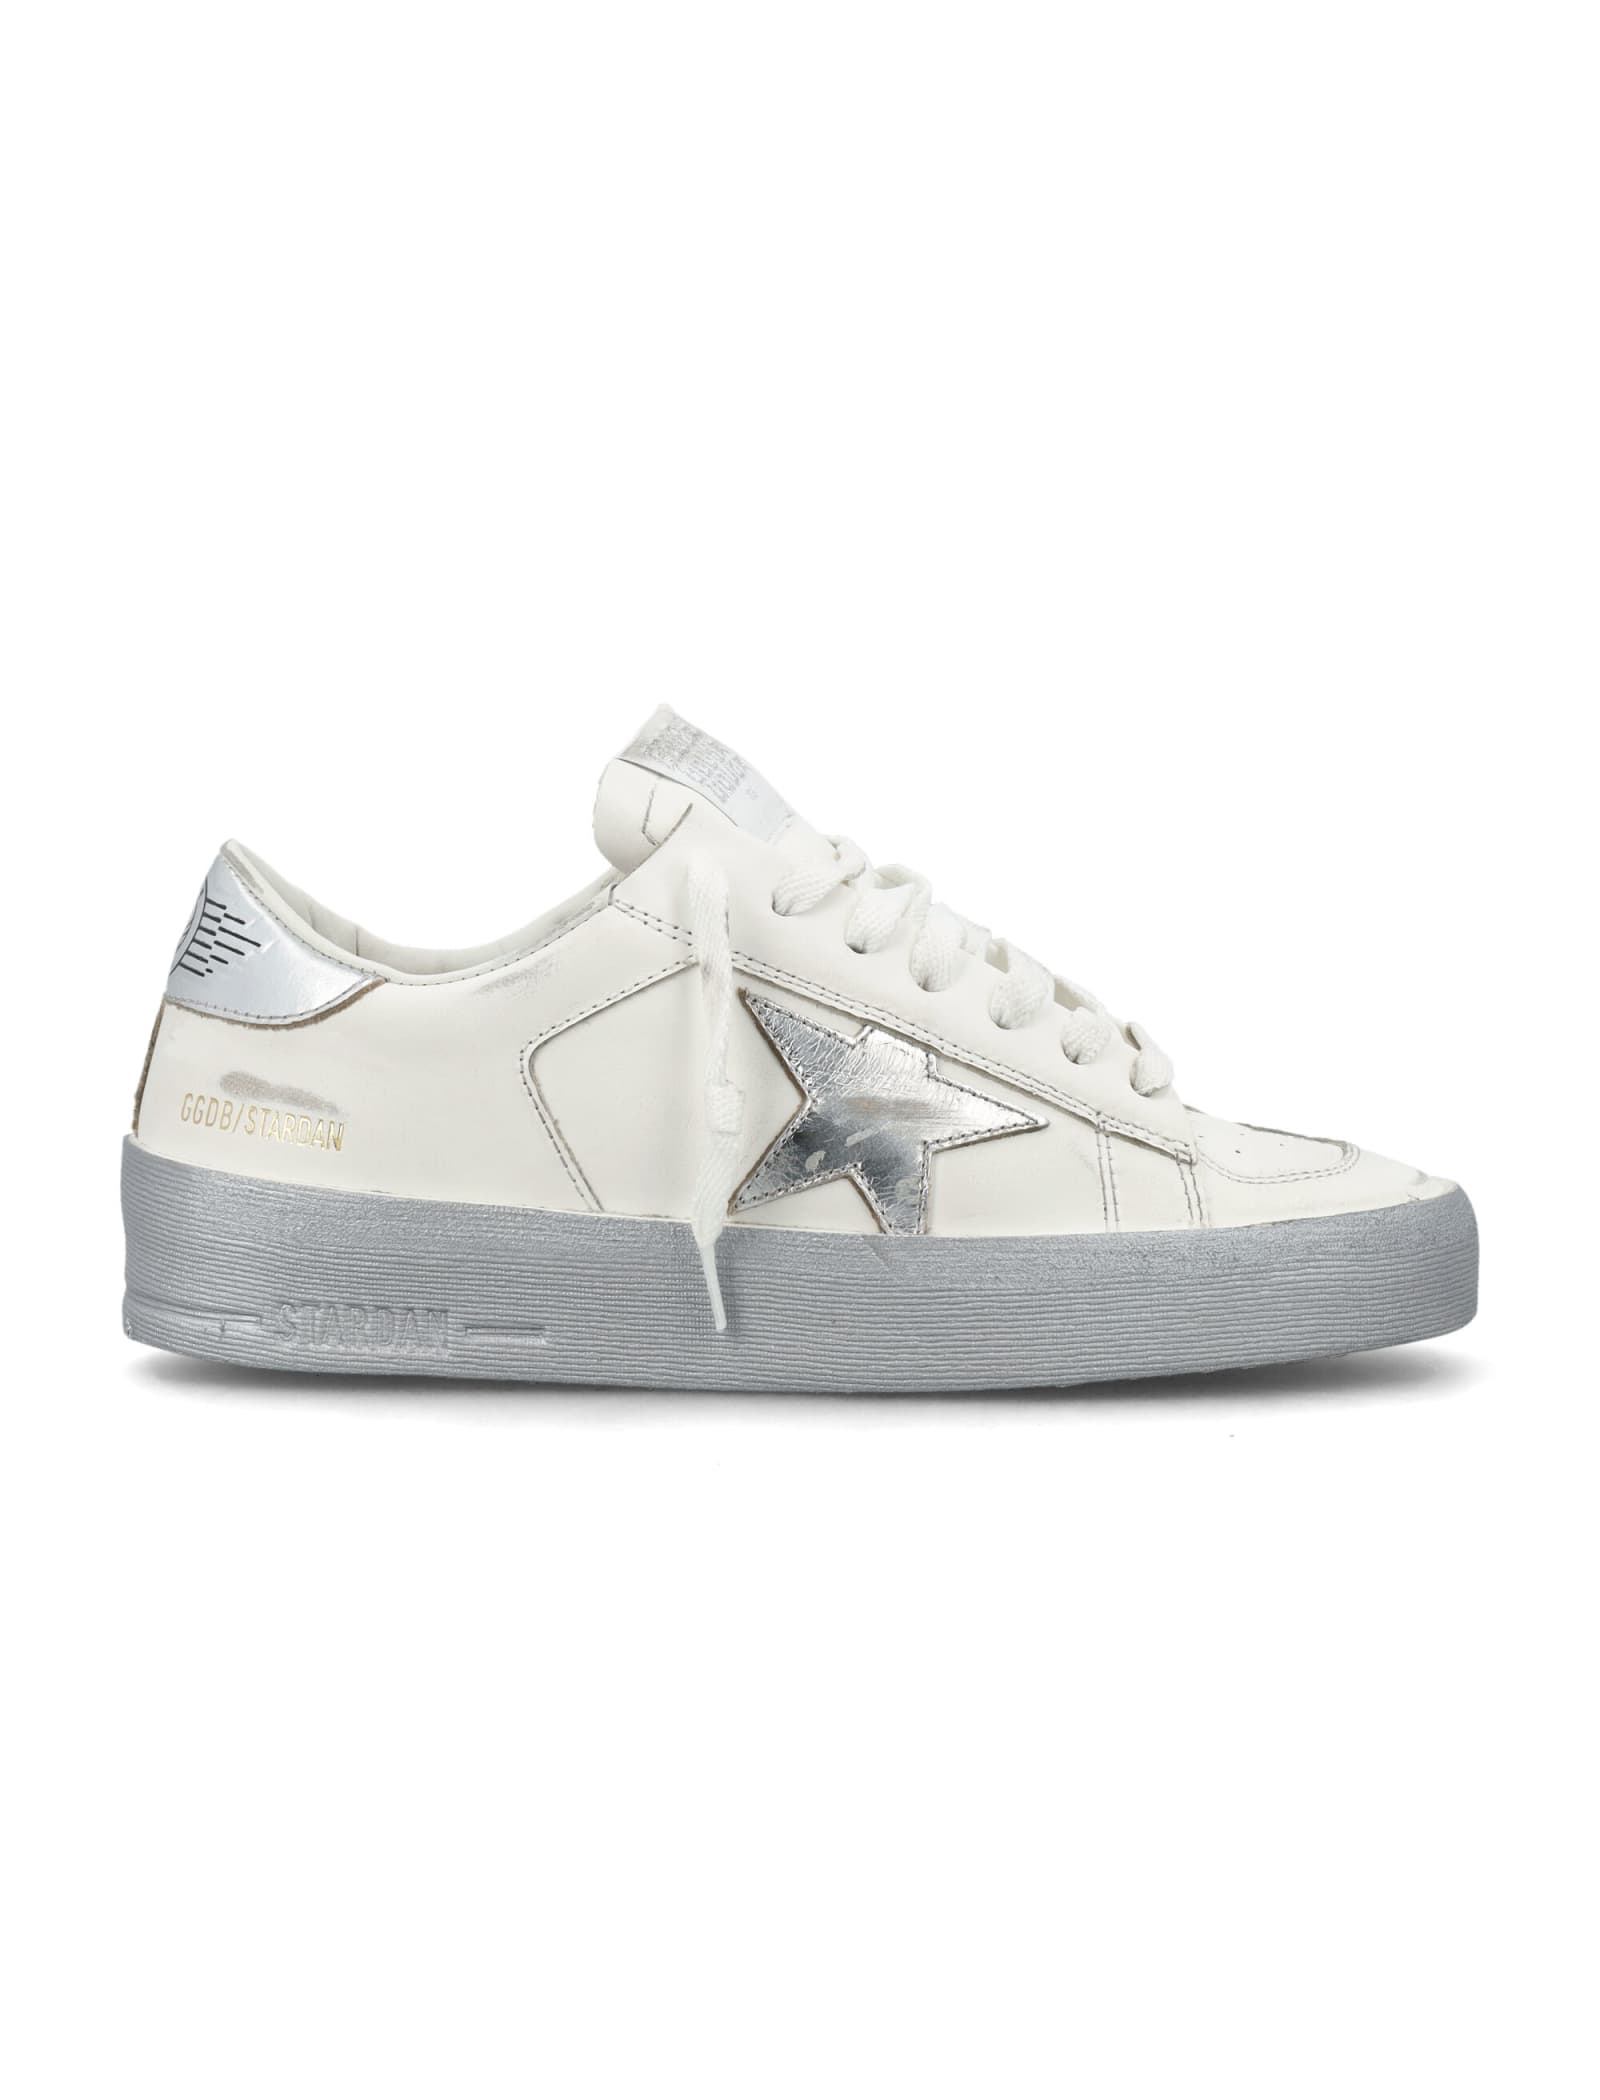 Shop Golden Goose Stardan Womans Sneakers In White Silver